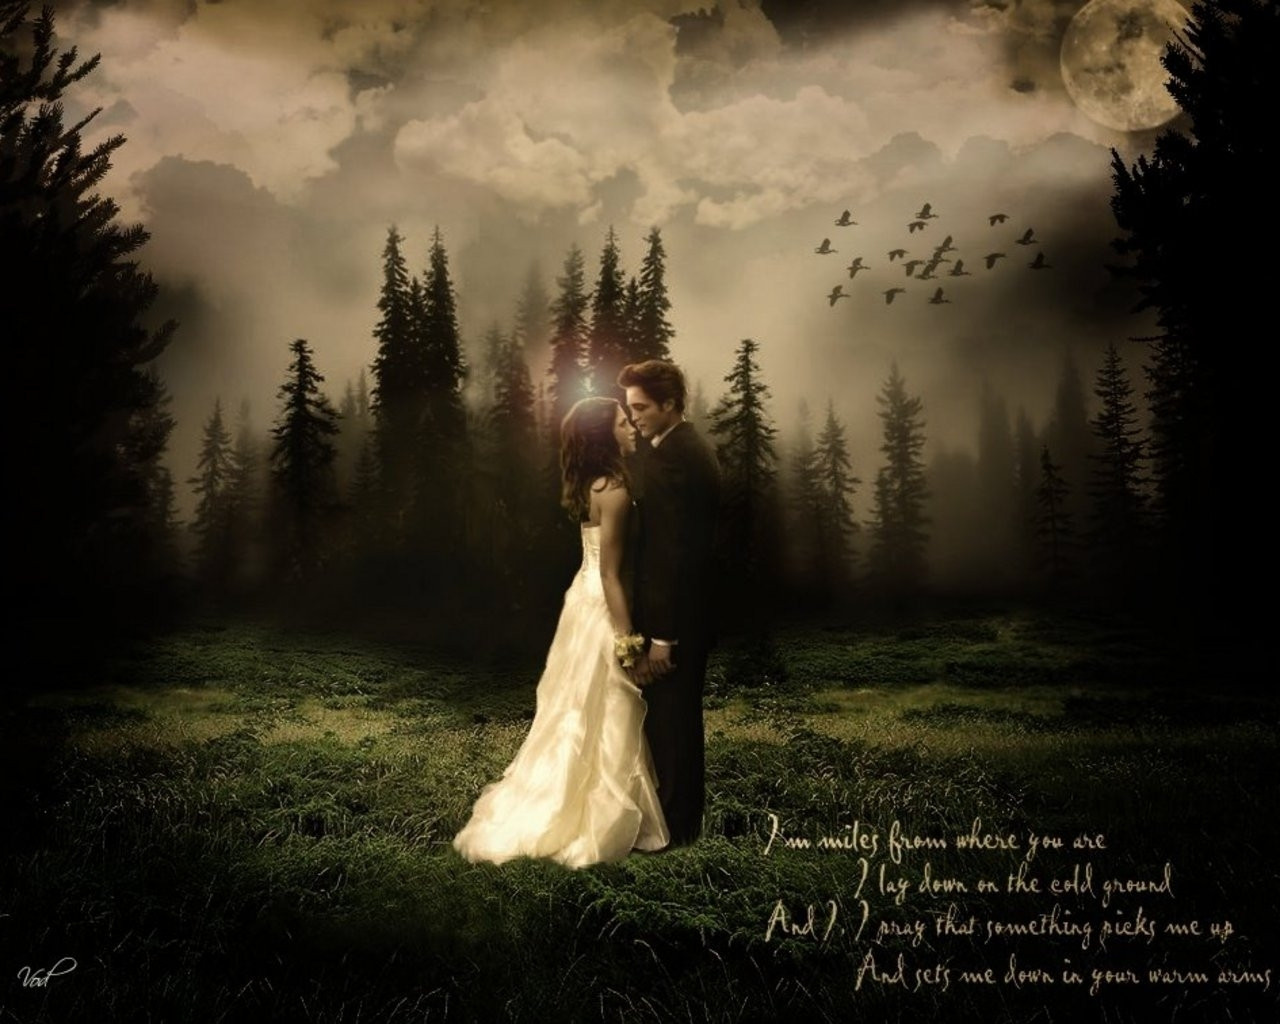 Twilight Wedding Vows
 Fall in Love Bella s and Edward s Wedding Vows